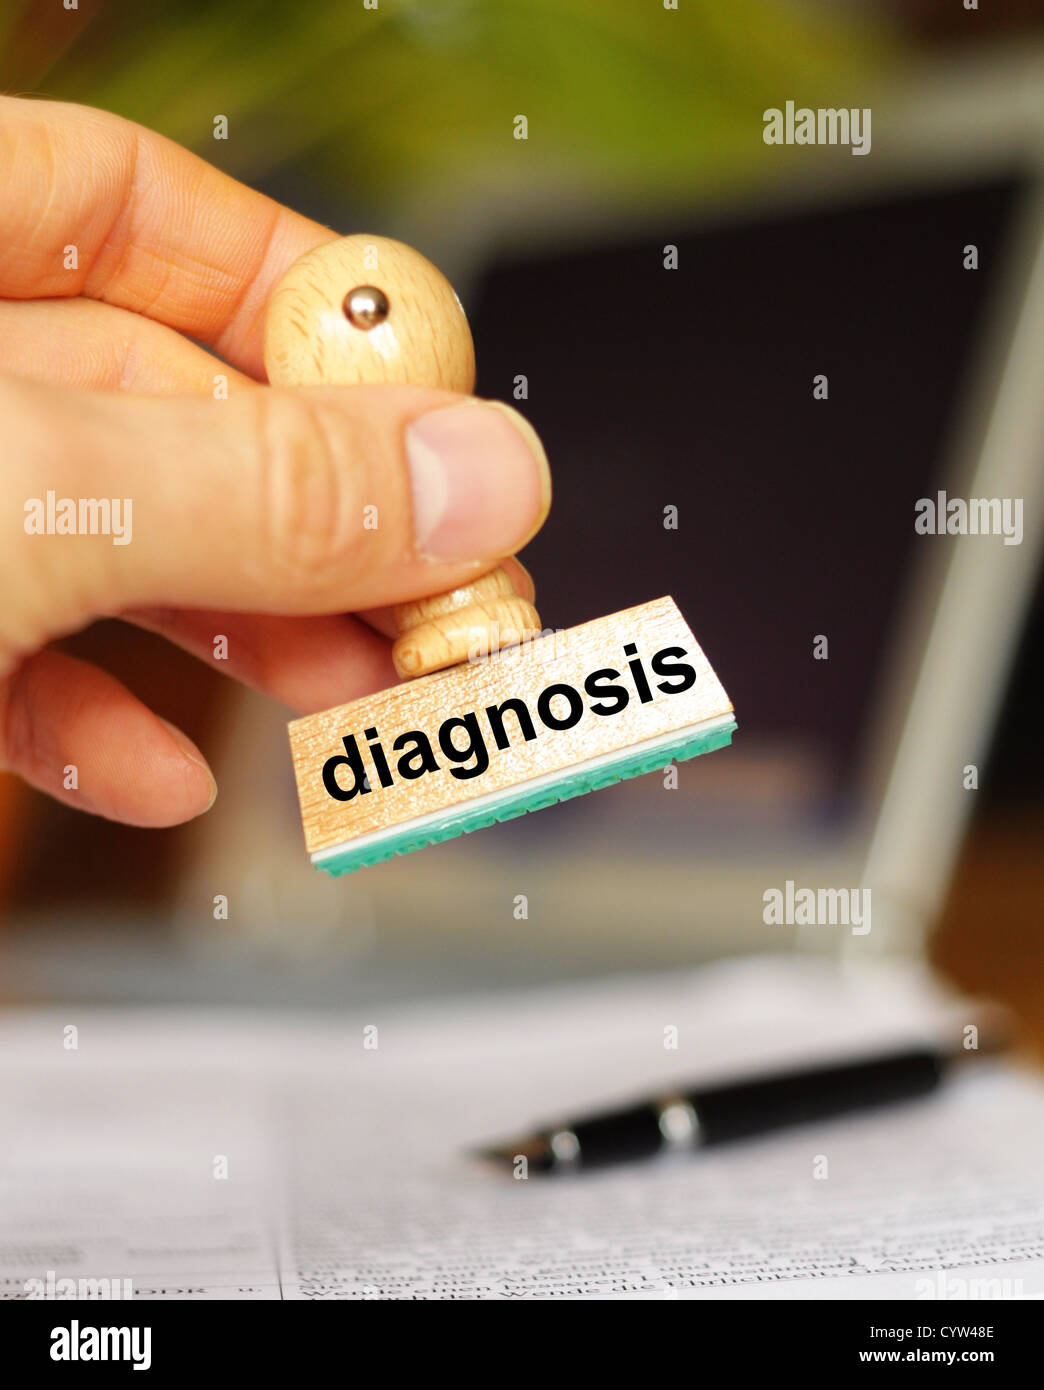 diagnosis stamp in hospital offcie showing health concept Stock Photo